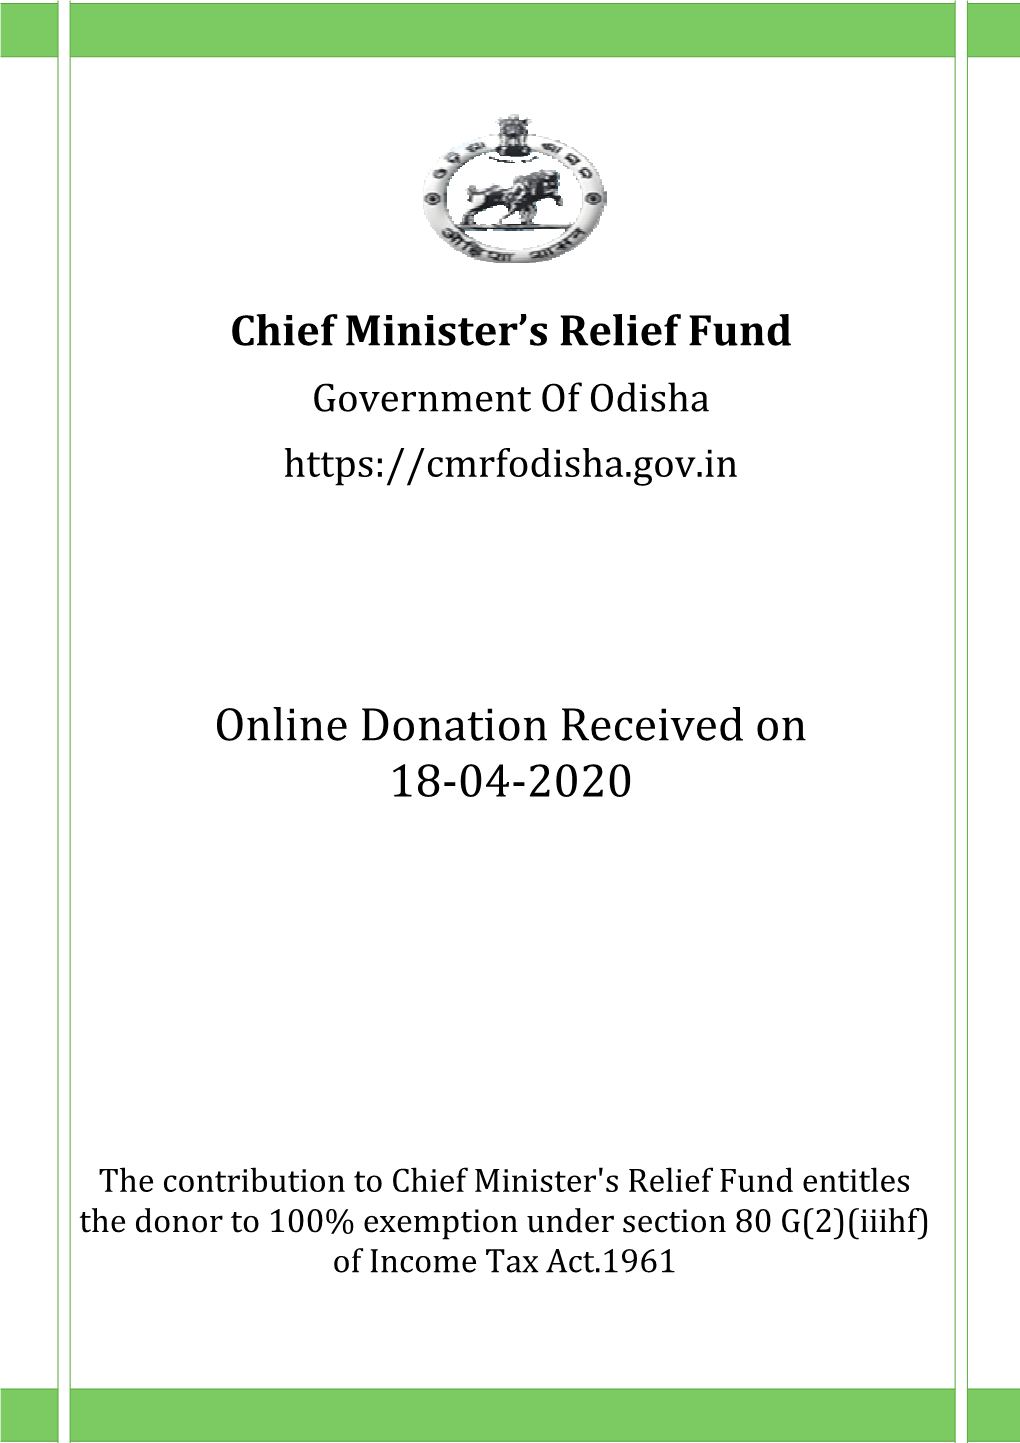 Online Donation Re Donation Received on 18-04-2020 On